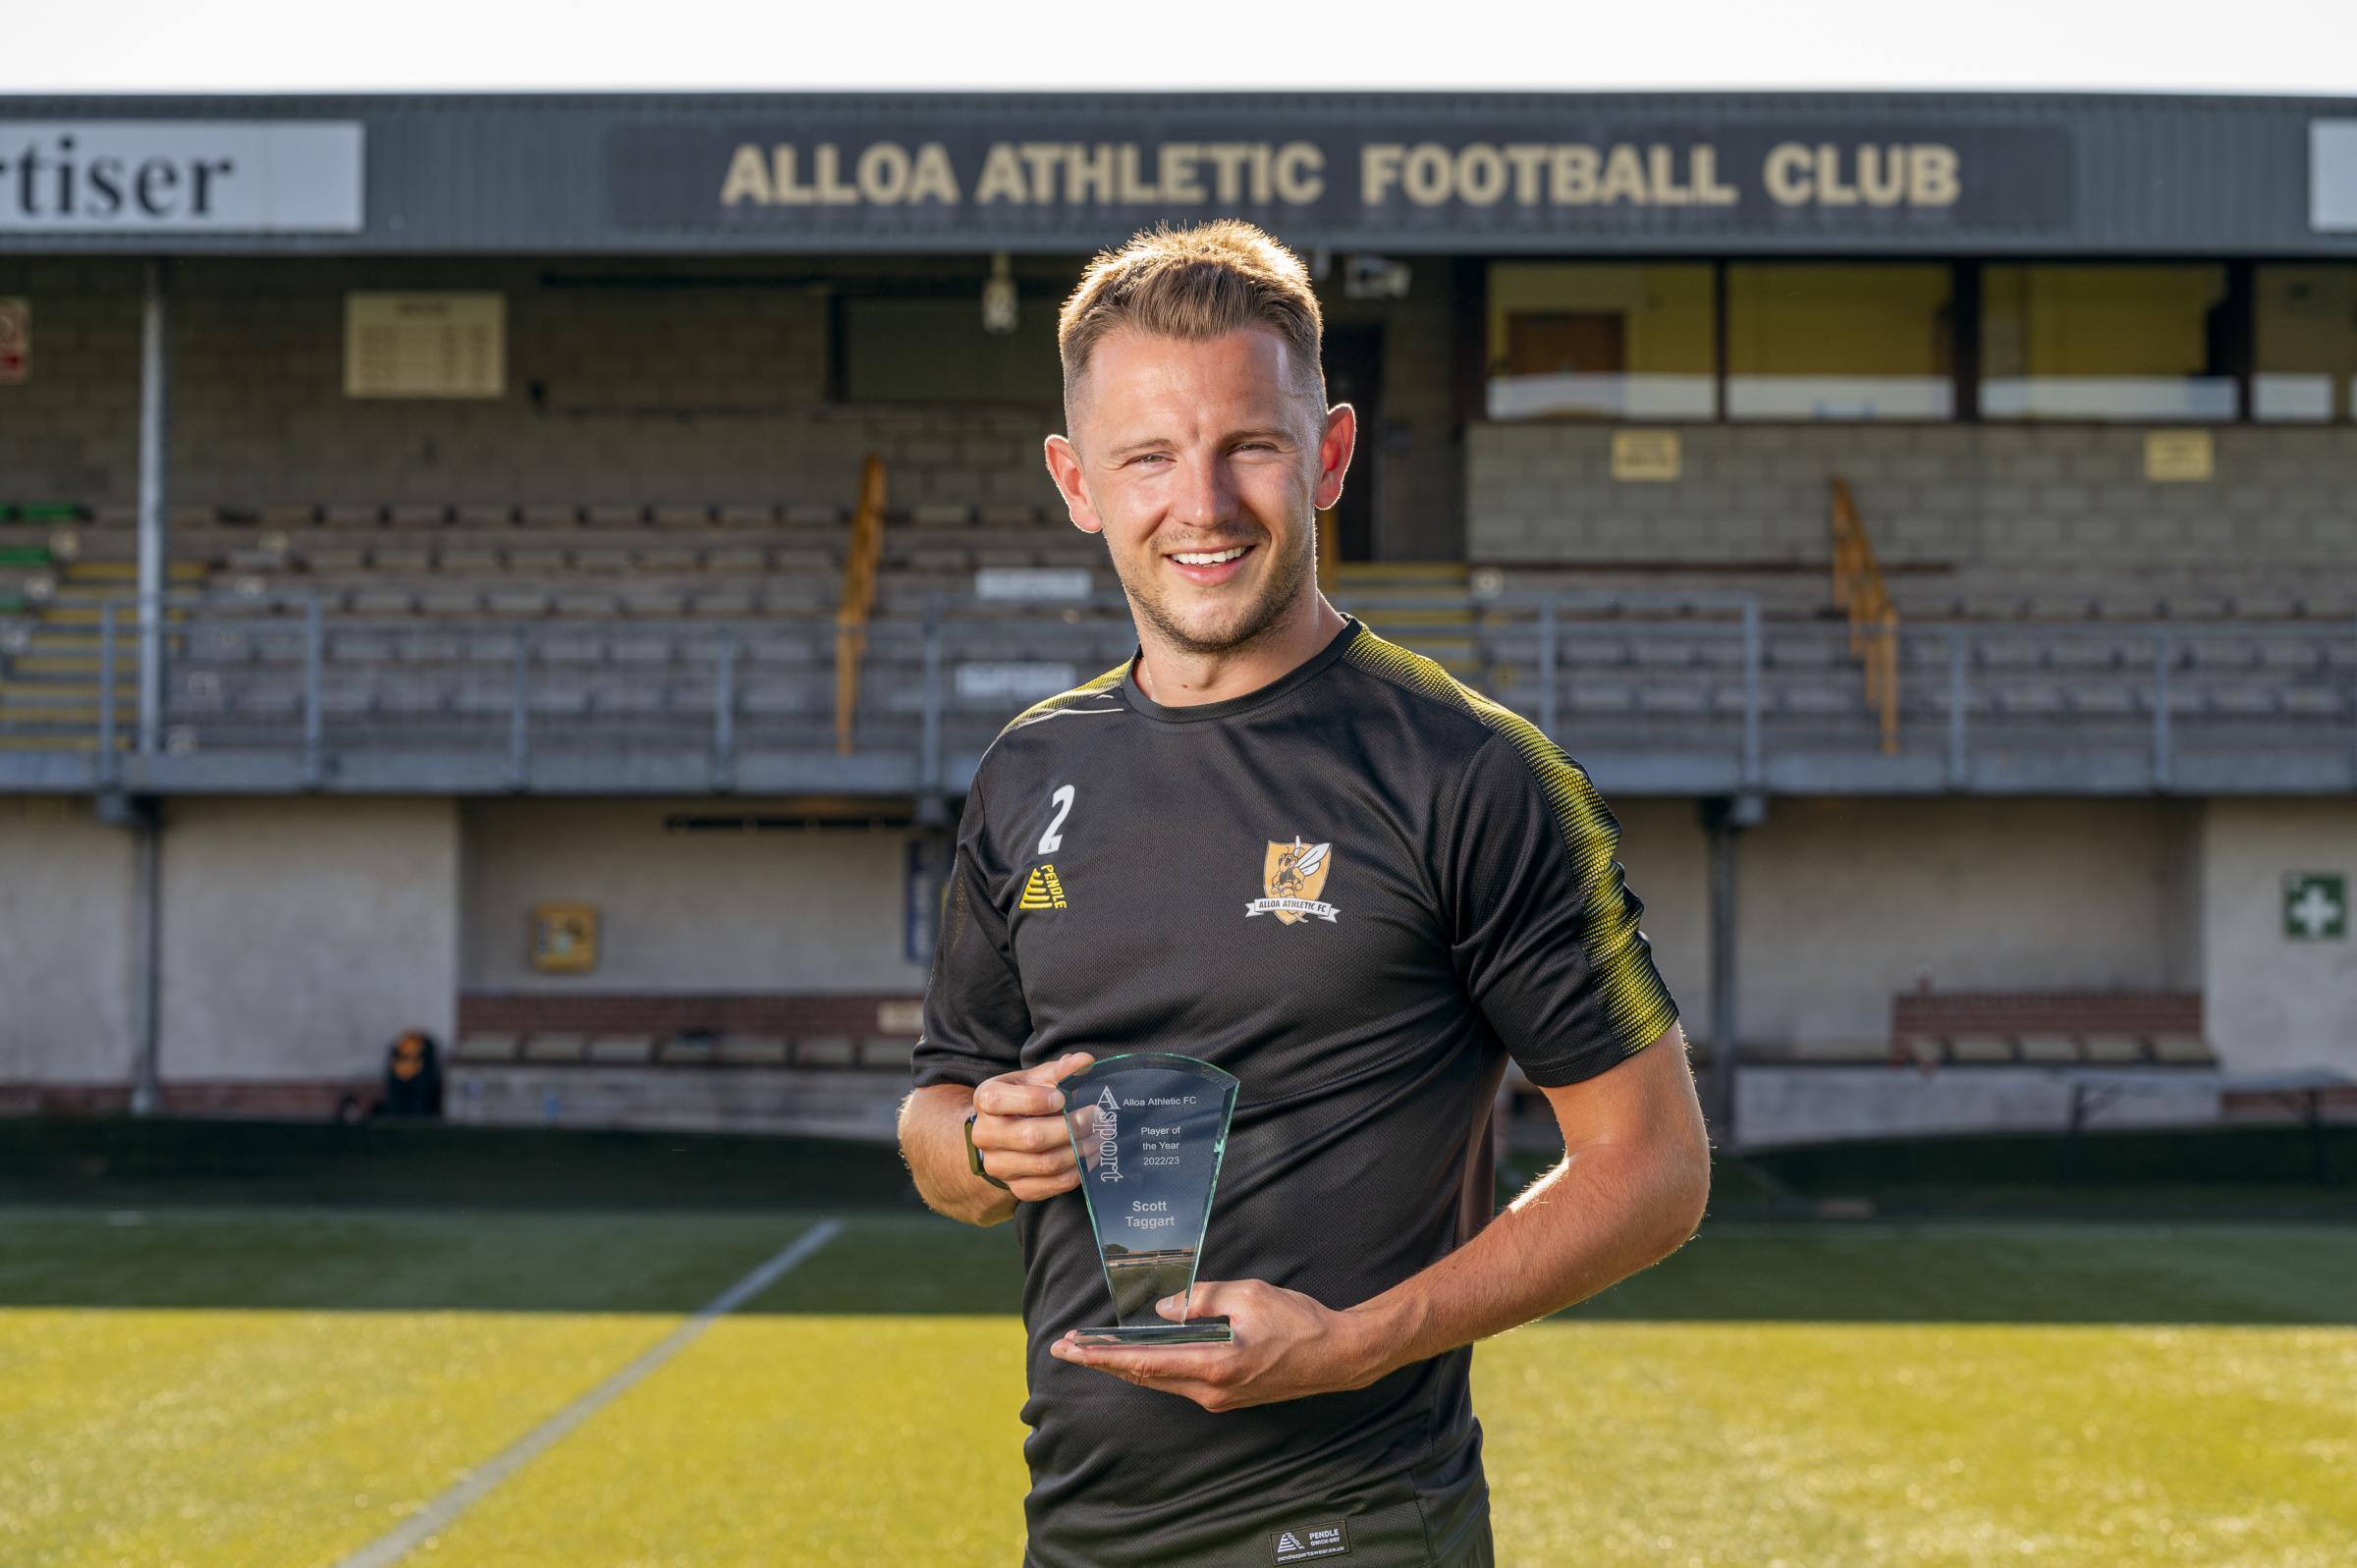 Alloa's Scott Taggart wins Advertiser Sport Player of the Year